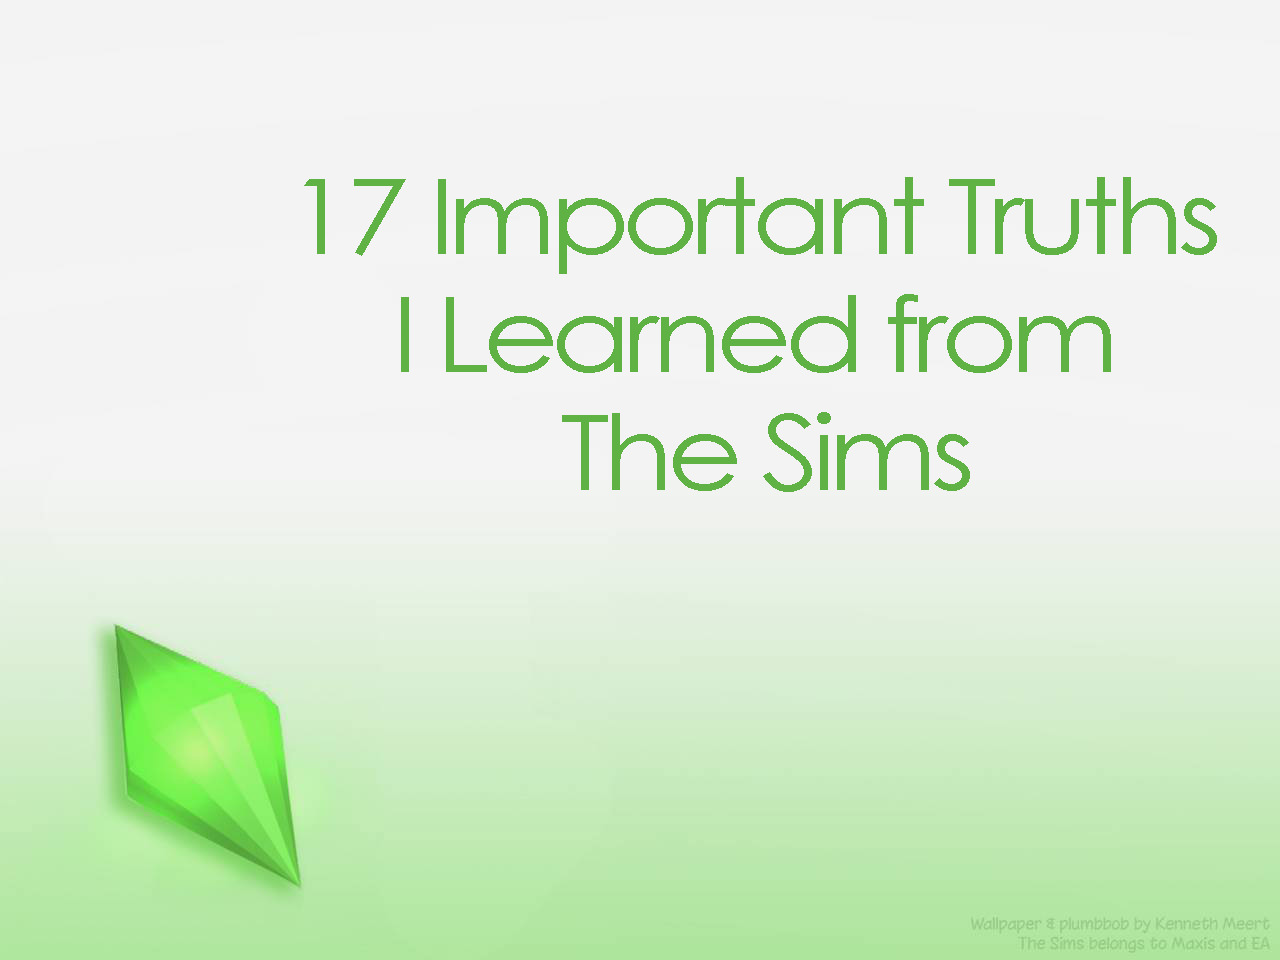 17 Important Truths I Learned from The Sims – No. 6 Applies to Us All